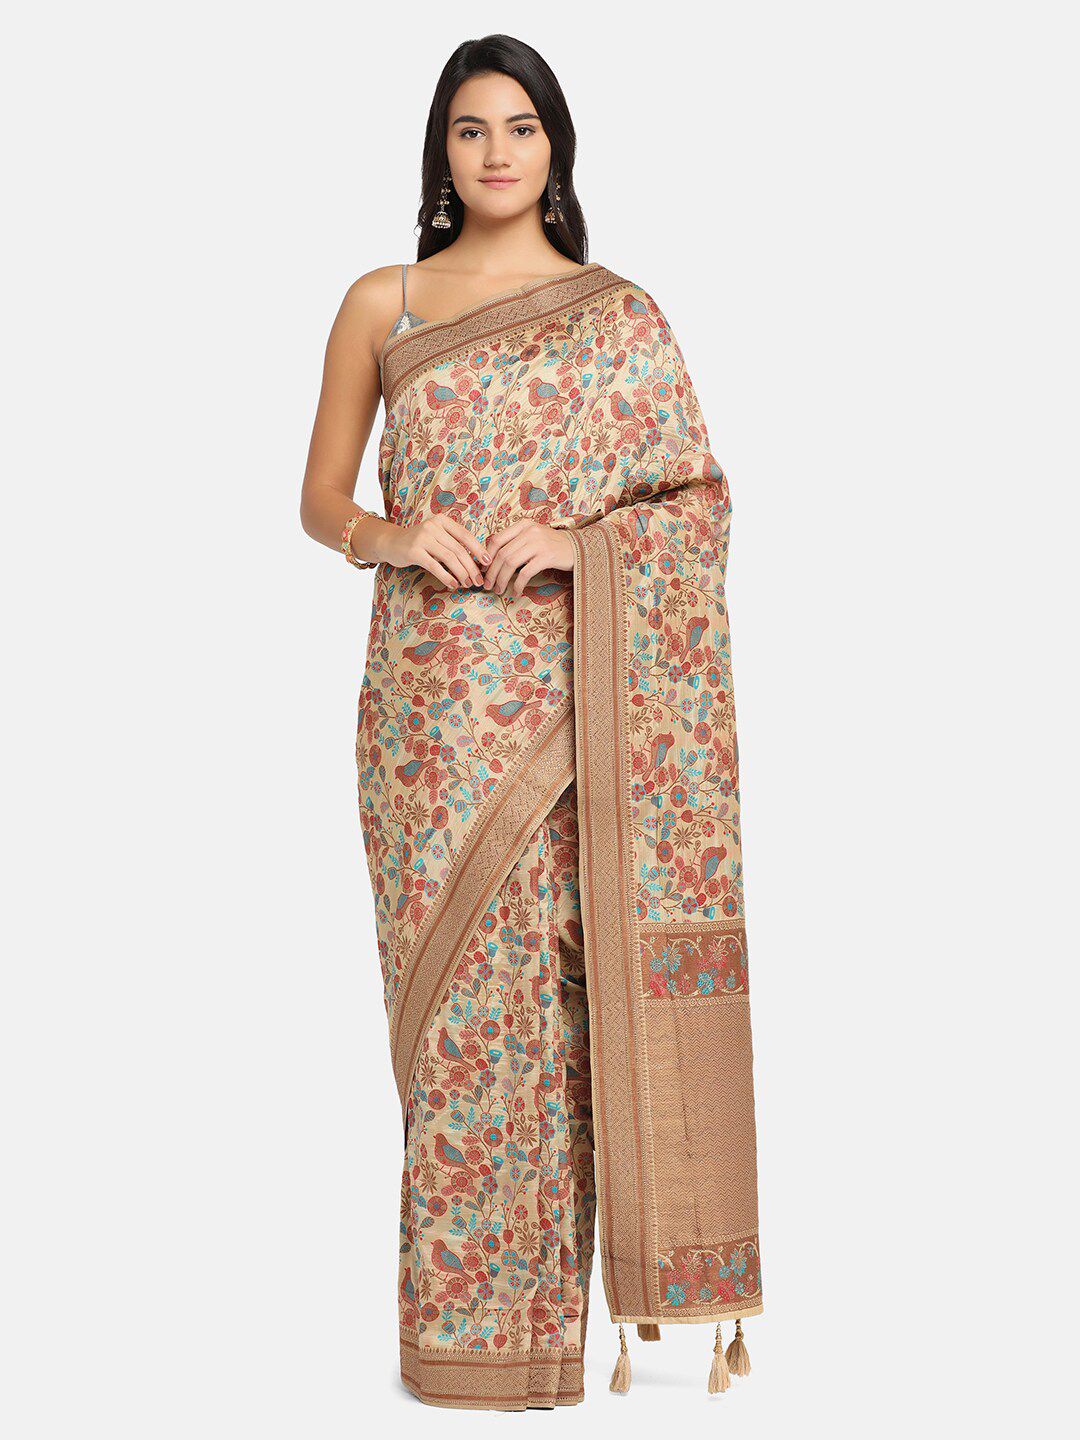 BOMBAY SELECTIONS Brown & Blue Woven Design Embroidered Banarasi Saree Price in India